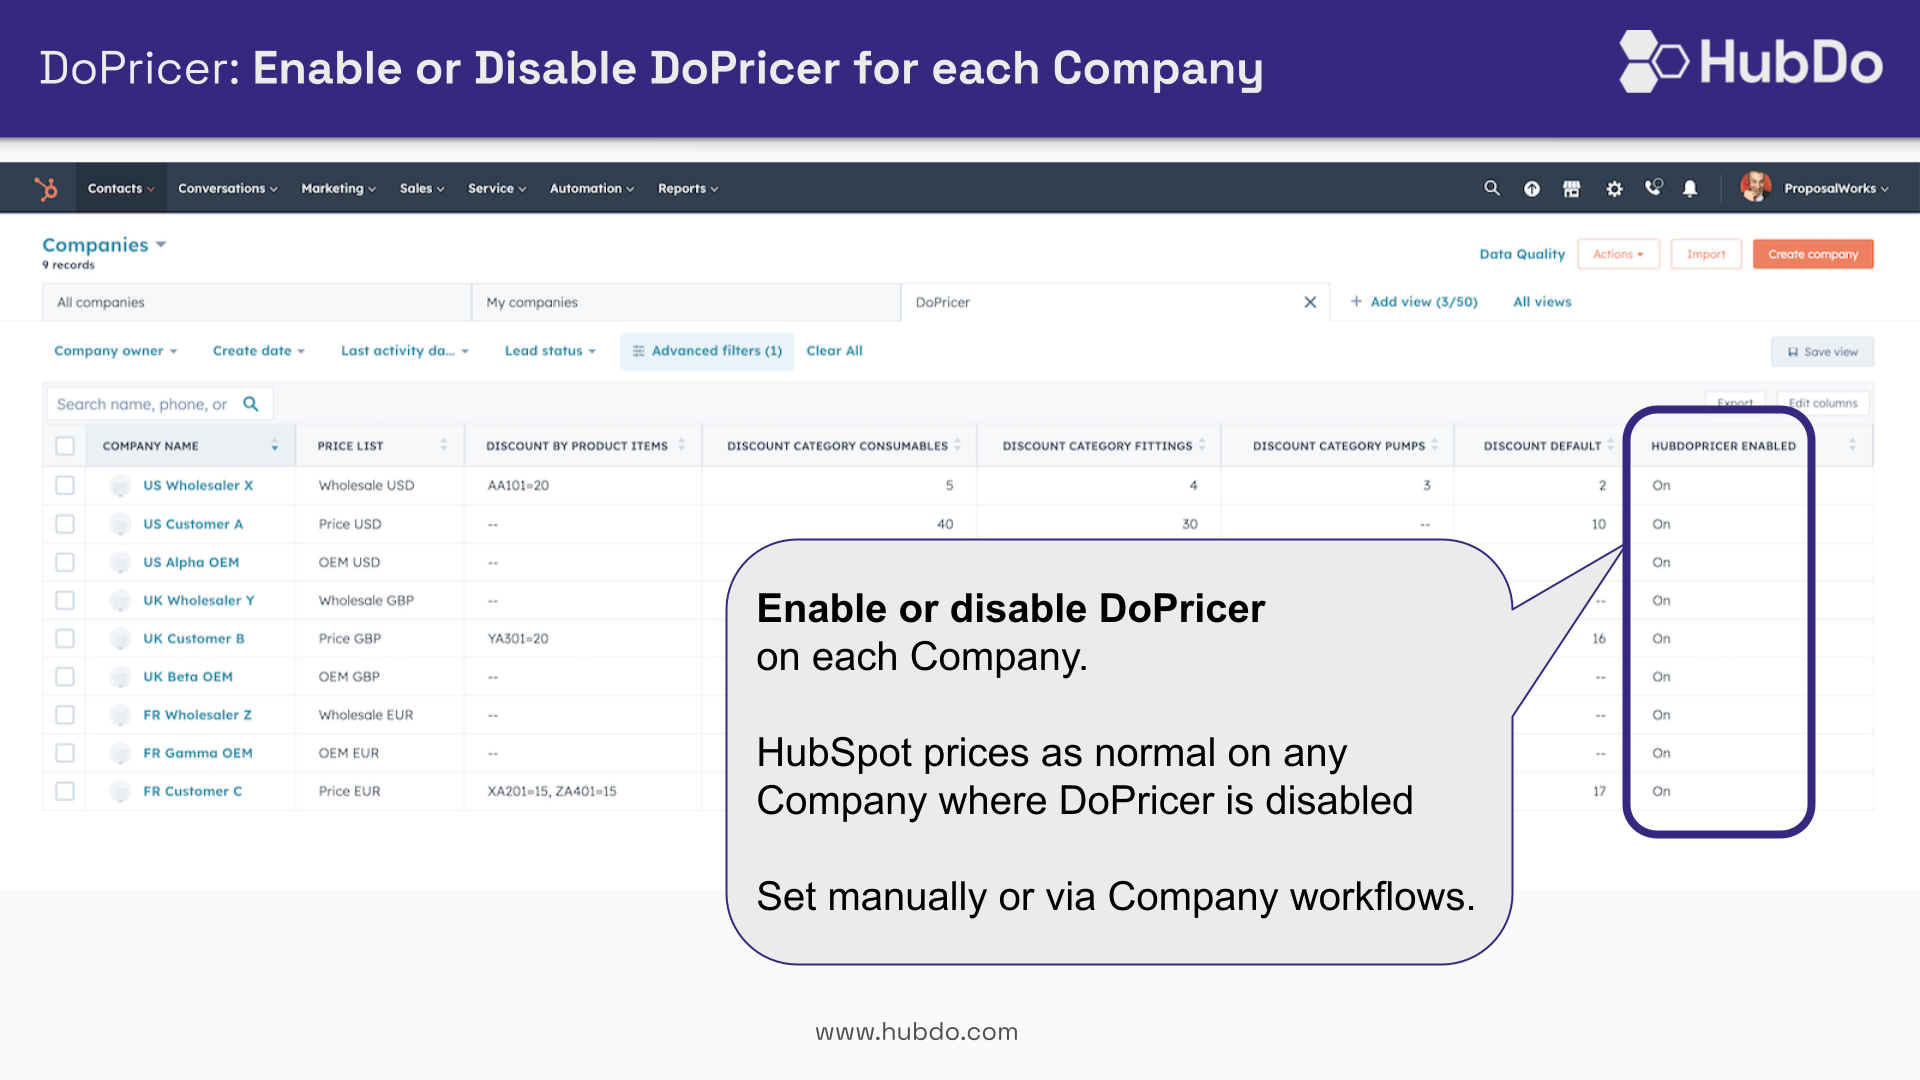 Enable or Disable DoPricer